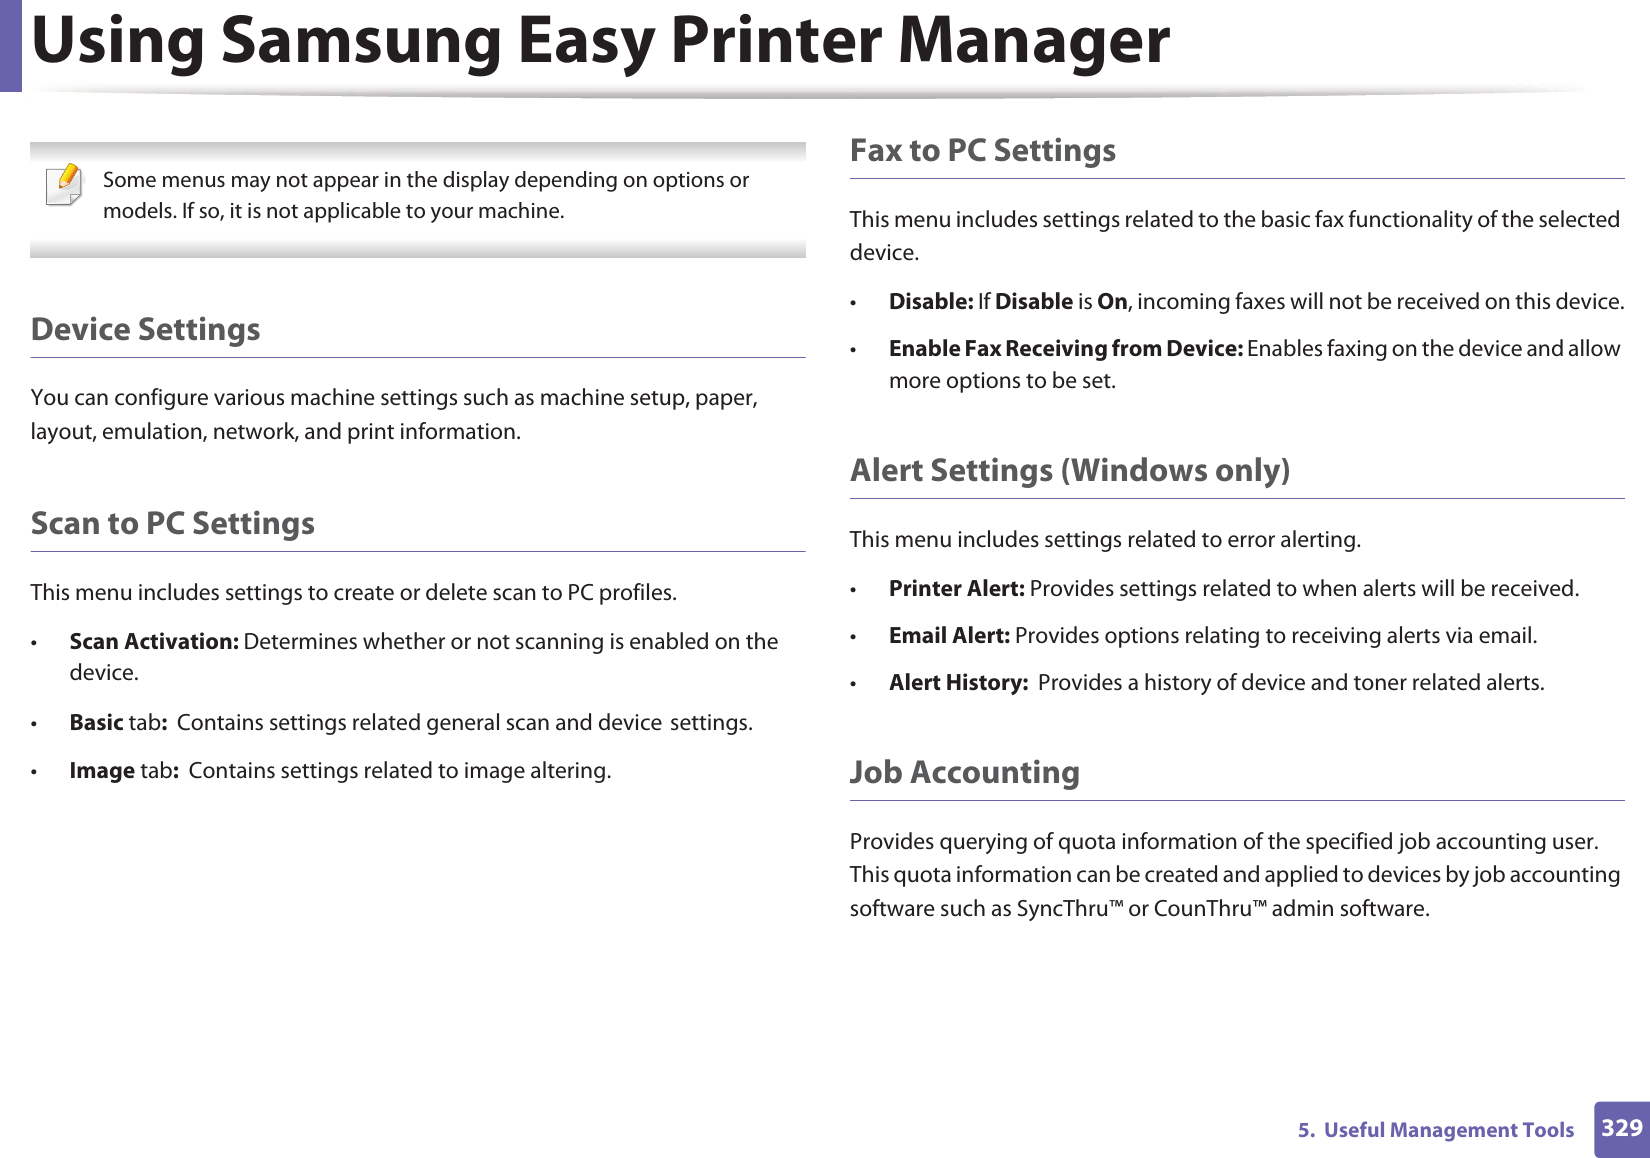 Using Samsung Easy Printer Manager3295.  Useful Management Tools Some menus may not appear in the display depending on options or models. If so, it is not applicable to your machine. Device SettingsYou can configure various machine settings such as machine setup, paper, layout, emulation, network, and print information.Scan to PC SettingsThis menu includes settings to create or delete scan to PC profiles. •Scan Activation: Determines whether or not scanning is enabled on the device.•Basic tab:  Contains settings related general scan and deviceGsettings.•Image tab:  Contains settings related to image altering.Fax to PC SettingsThis menu includes settings related to the basic fax functionality of the selected device. •Disable: If Disable is On, incoming faxes will not be received on this device.•Enable Fax Receiving from Device: Enables faxing on the device and allow more options to be set.Alert Settings (Windows only)This menu includes settings related to error alerting. •Printer Alert: Provides settings related to when alerts will be received.•Email Alert: Provides options relating to receiving alerts via email.•Alert History:  Provides a history of device and toner related alerts.Job AccountingProvides querying of quota information of the specified job accounting user. This quota information can be created and applied to devices by job accounting software such as SyncThru™ or CounThru™ admin software.